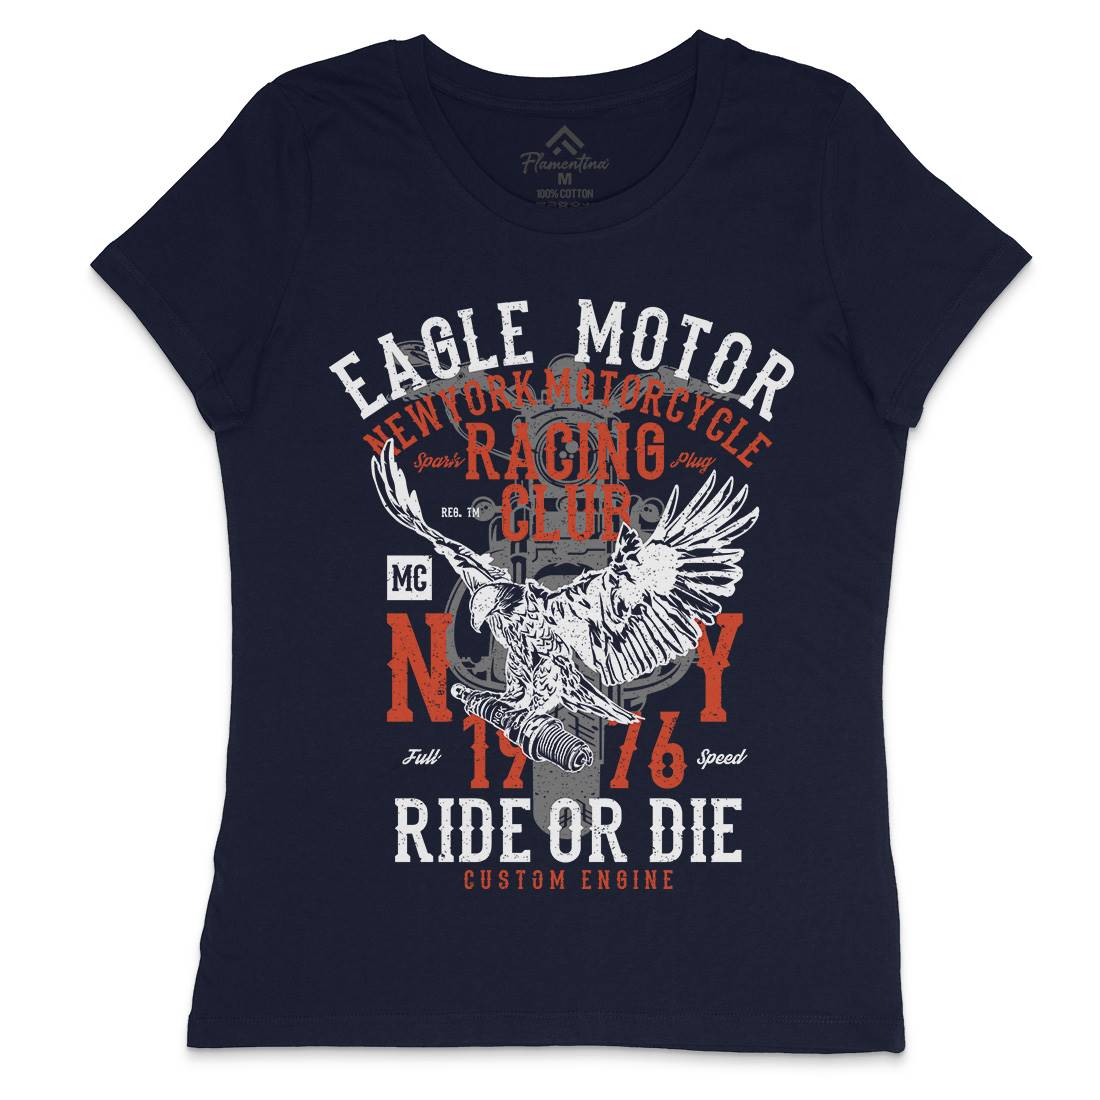 Eagle Motor Womens Crew Neck T-Shirt Motorcycles A647